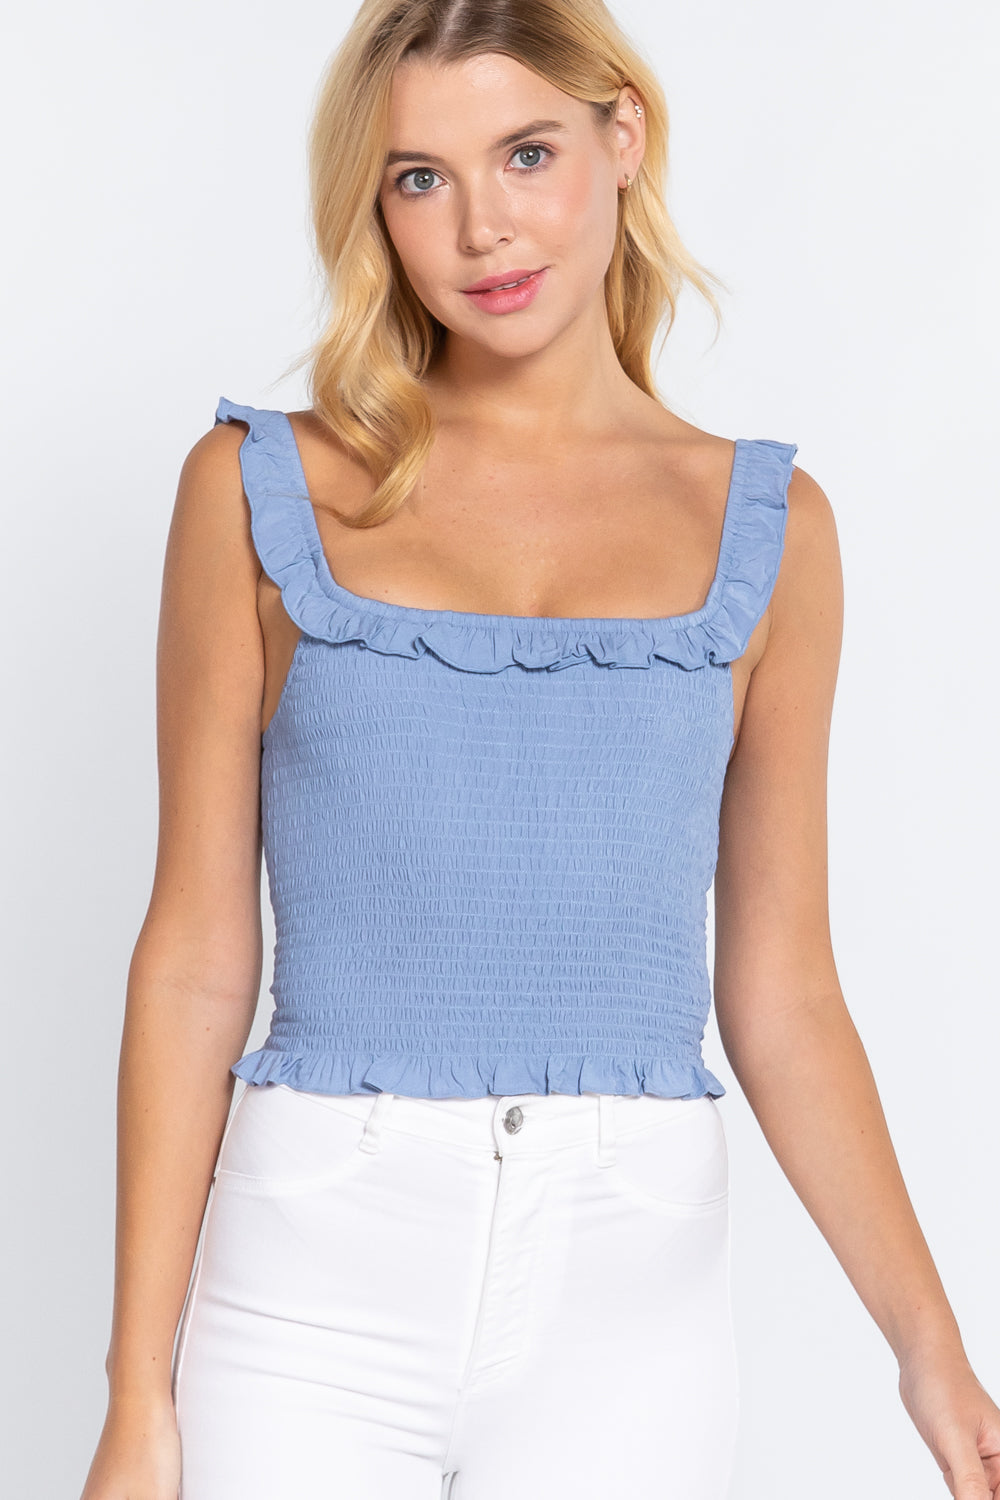 DENIM BLUE Smocking Ruffle Cami Woven Top - Ships from The US - women's shirts at TFC&H Co.